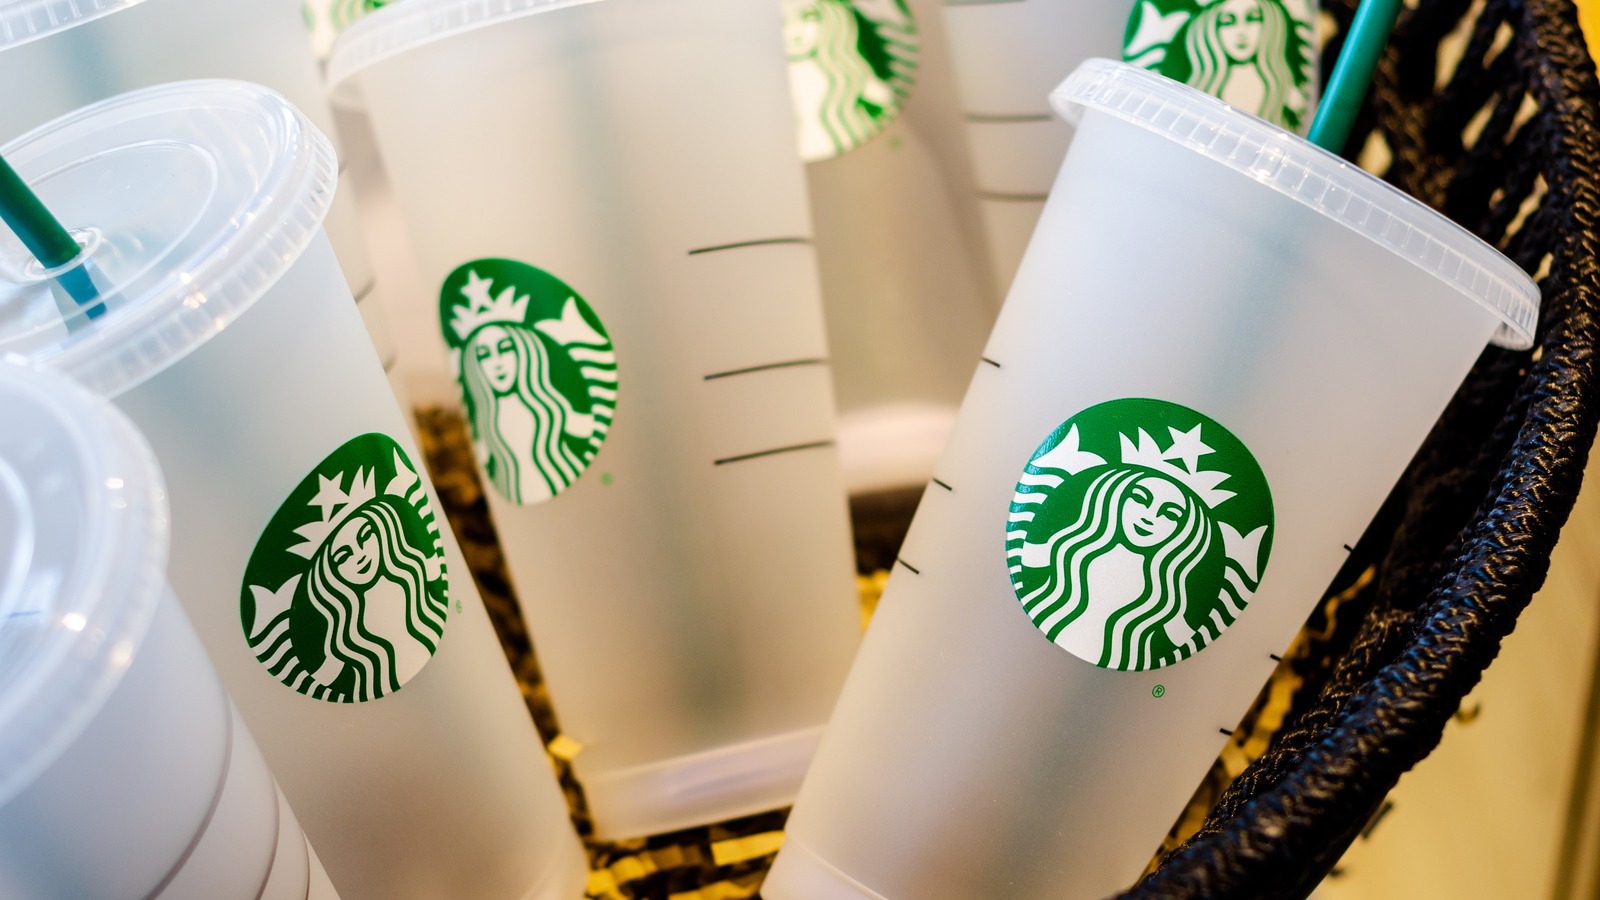 https://www.tastingtable.com/img/gallery/which-size-does-starbucks-charge-for-when-you-bring-a-reusable-cup/l-intro-1692739428.jpg